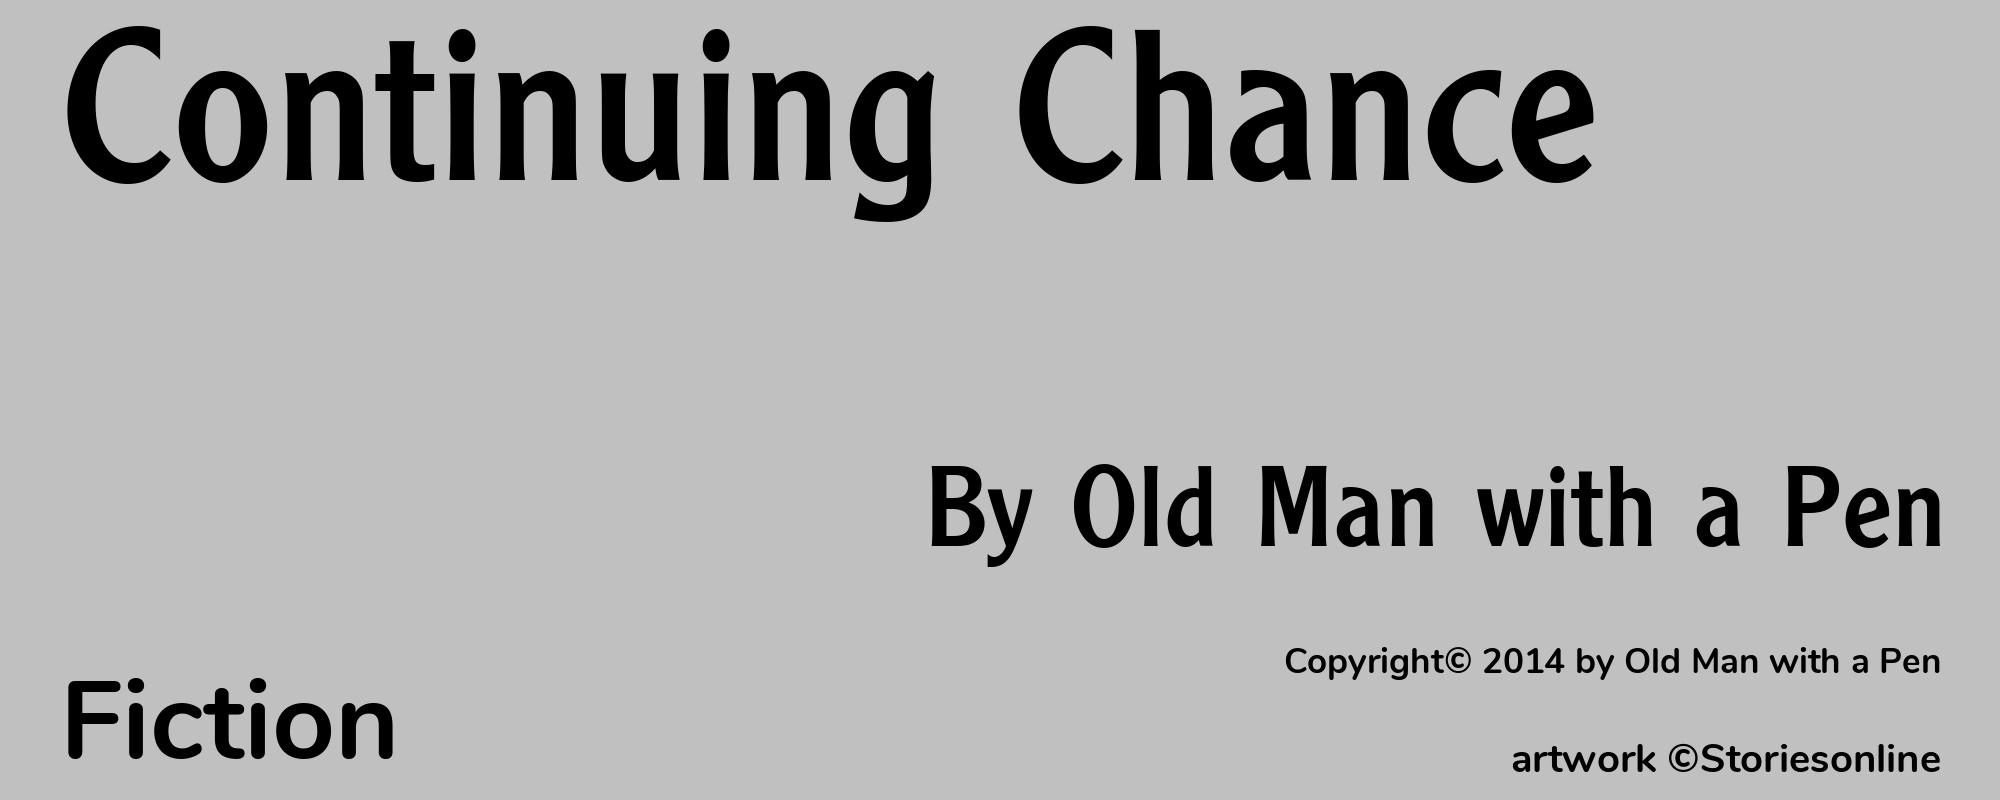 Continuing Chance - Cover